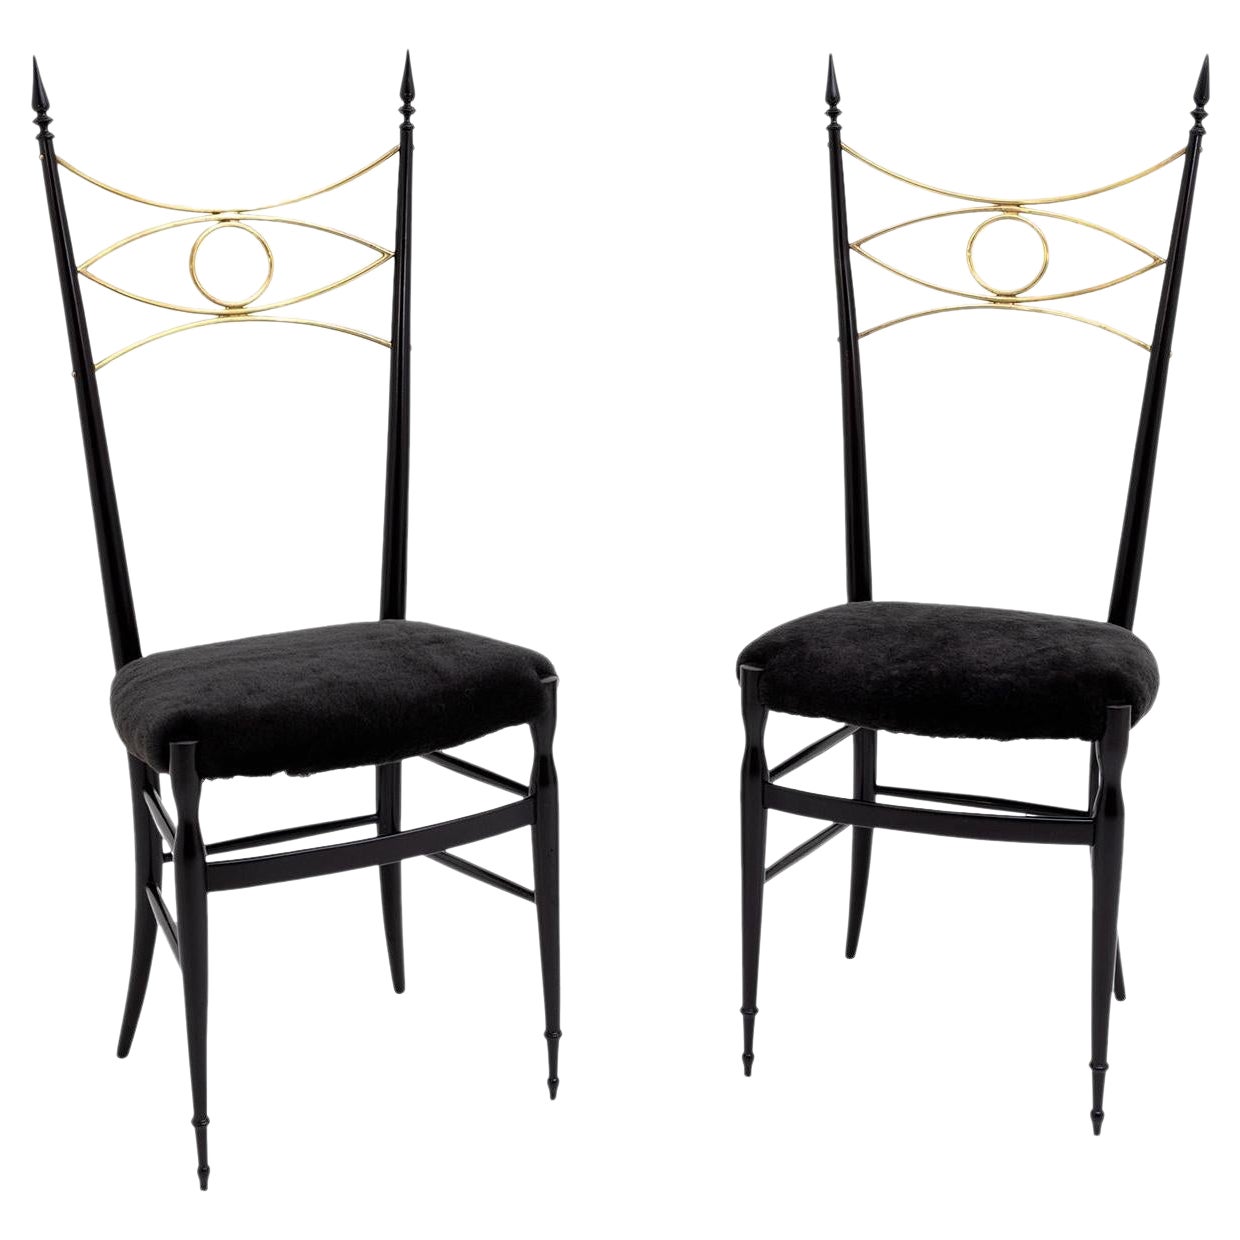 20th Century Italian Pair Brass Eye-Shaped Dining Room Chairs by Paolo Buffa For Sale